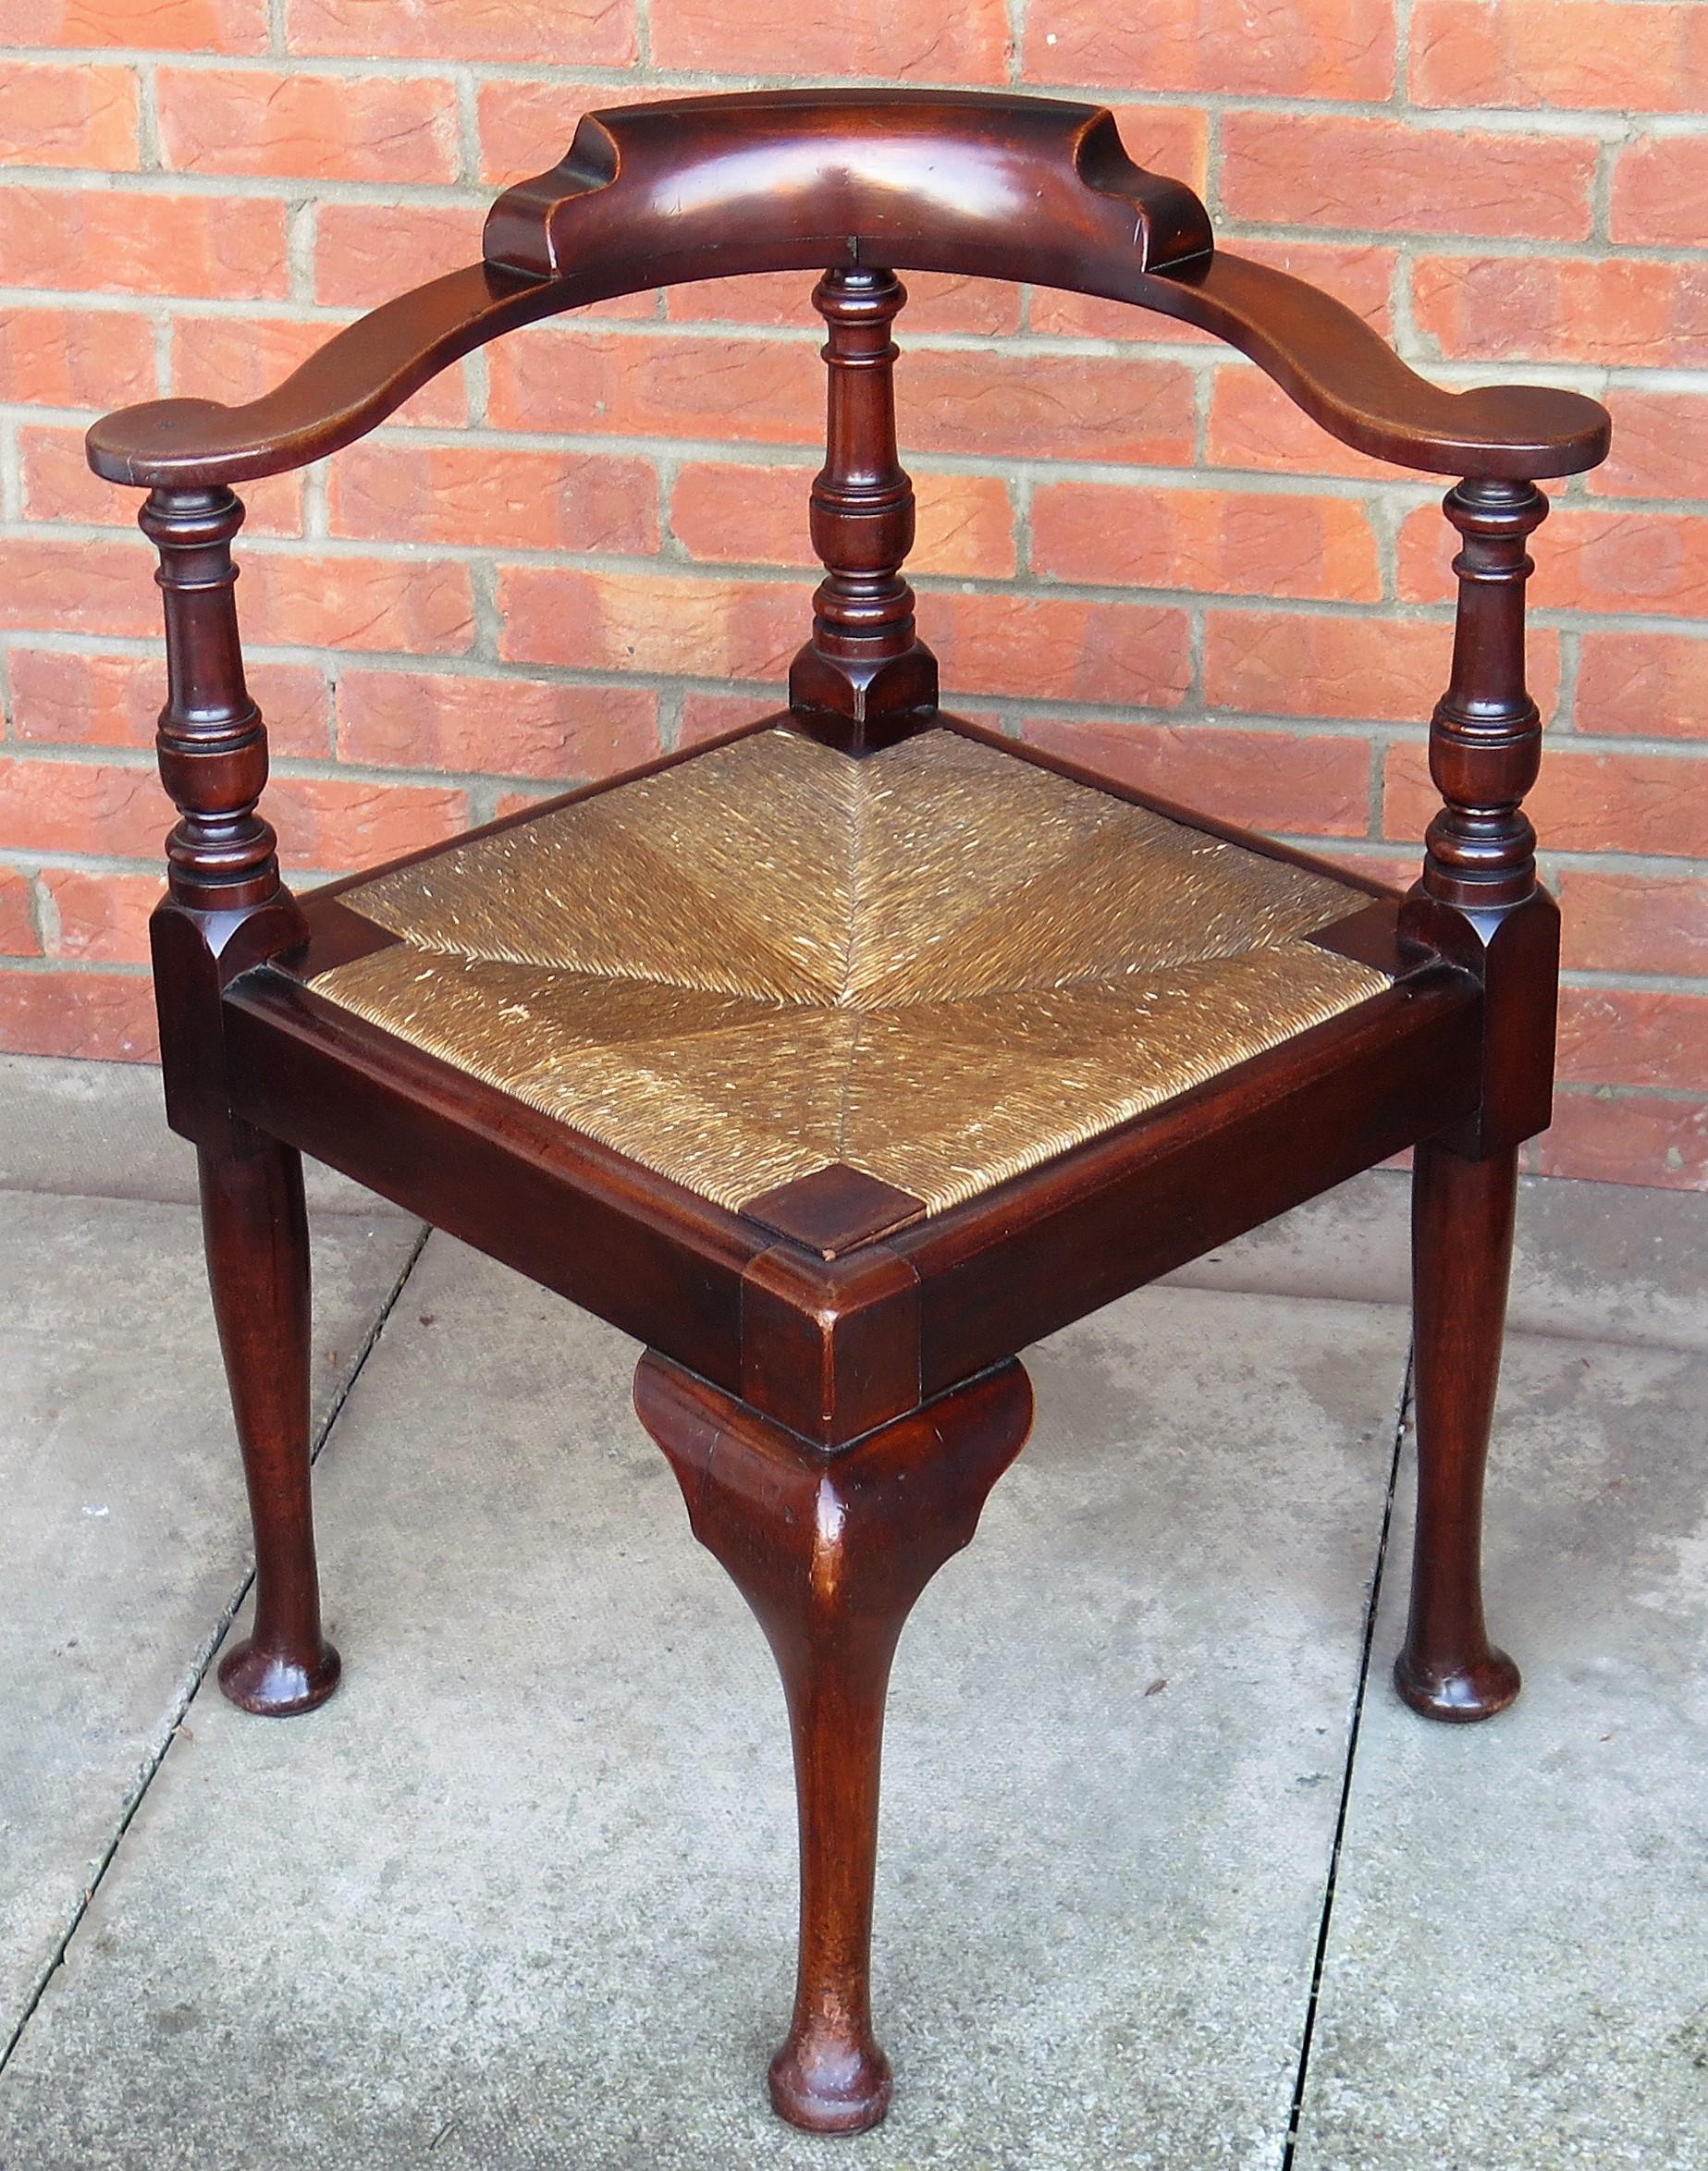 This is a good quality corner chair or armchair handmade from solid hardwood, possibly walnut with a Rush drop-in seat and dating to the 18th century English George 111rd period, circa 1780.

This is a very substantial, strongly handmade chair using